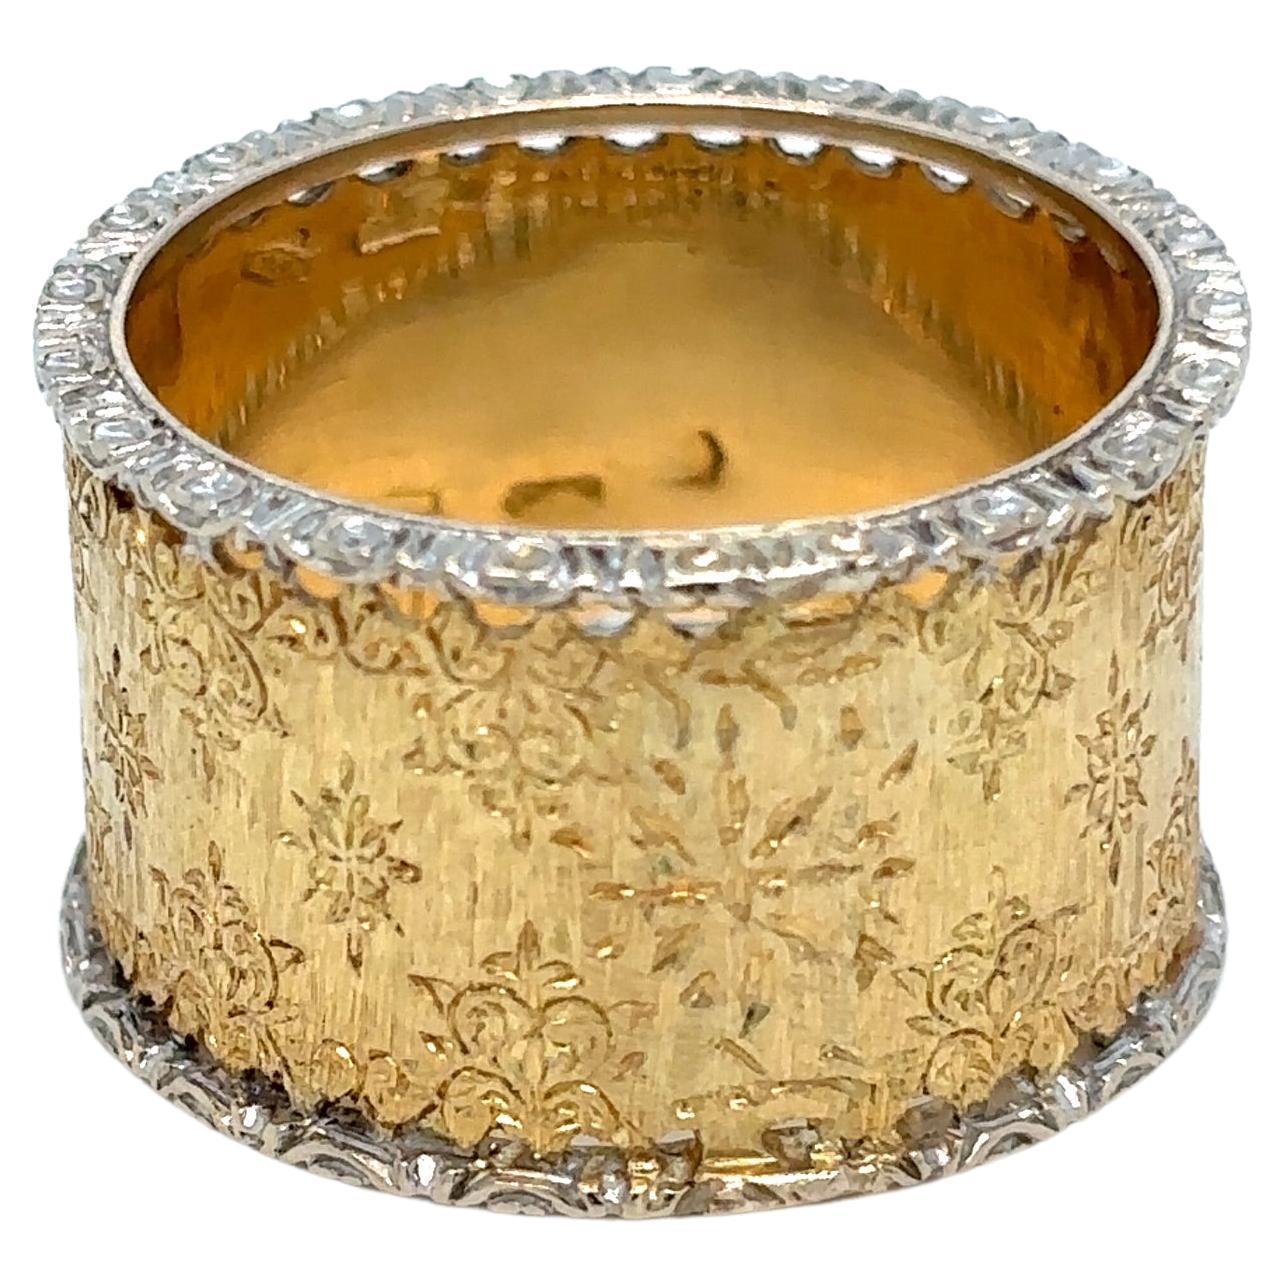 Mario Buccellati Engraved Gold Band Ring ca 1960s